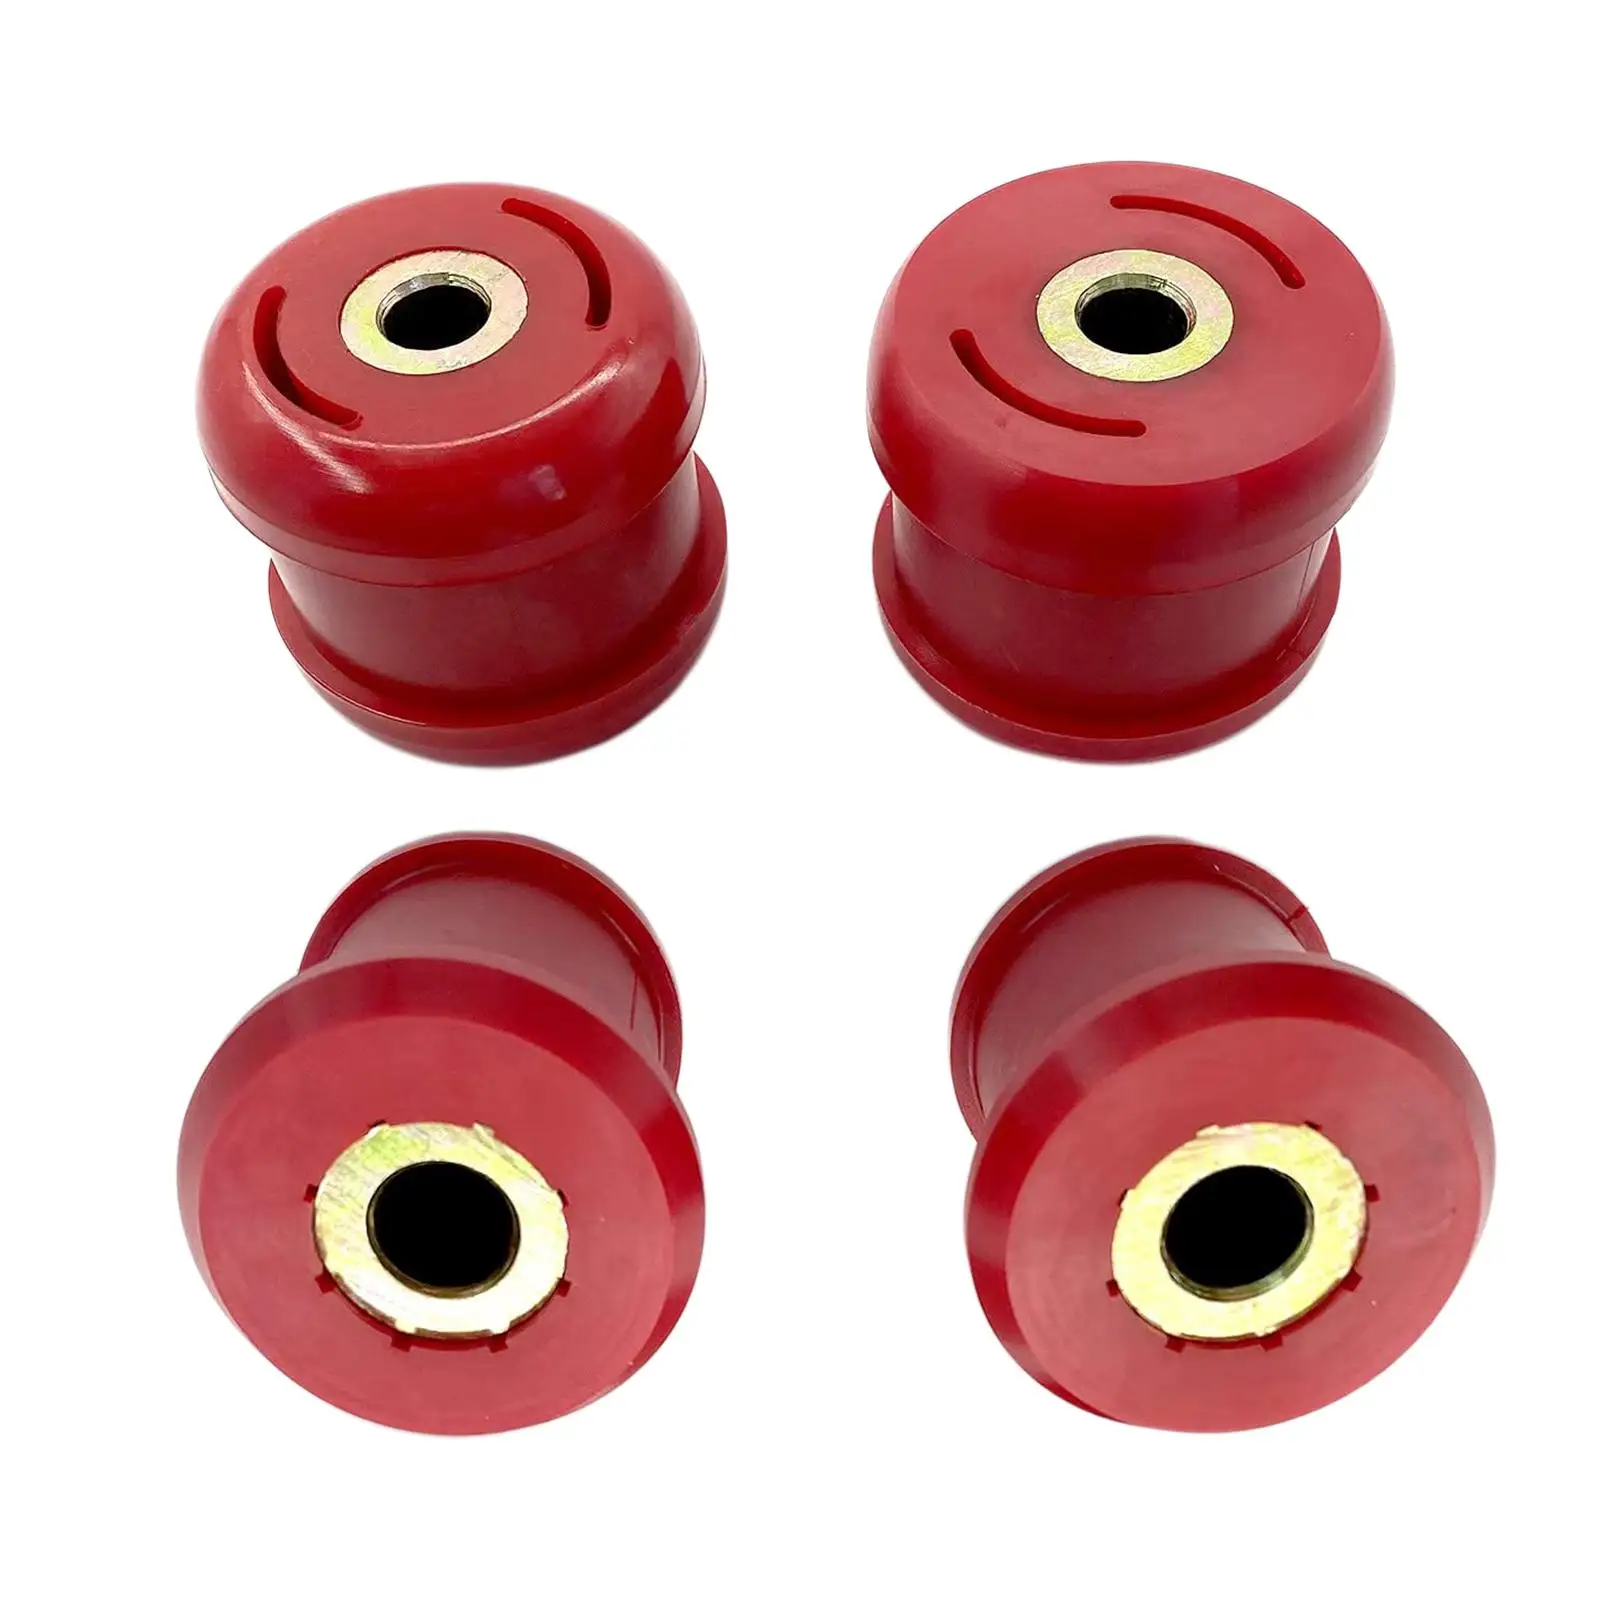 4x Front Lower Control Arm Bushing performance Car Accessories Replacement Bbj-Hd1-402F-Rd-839-D0 8-215 for RSX